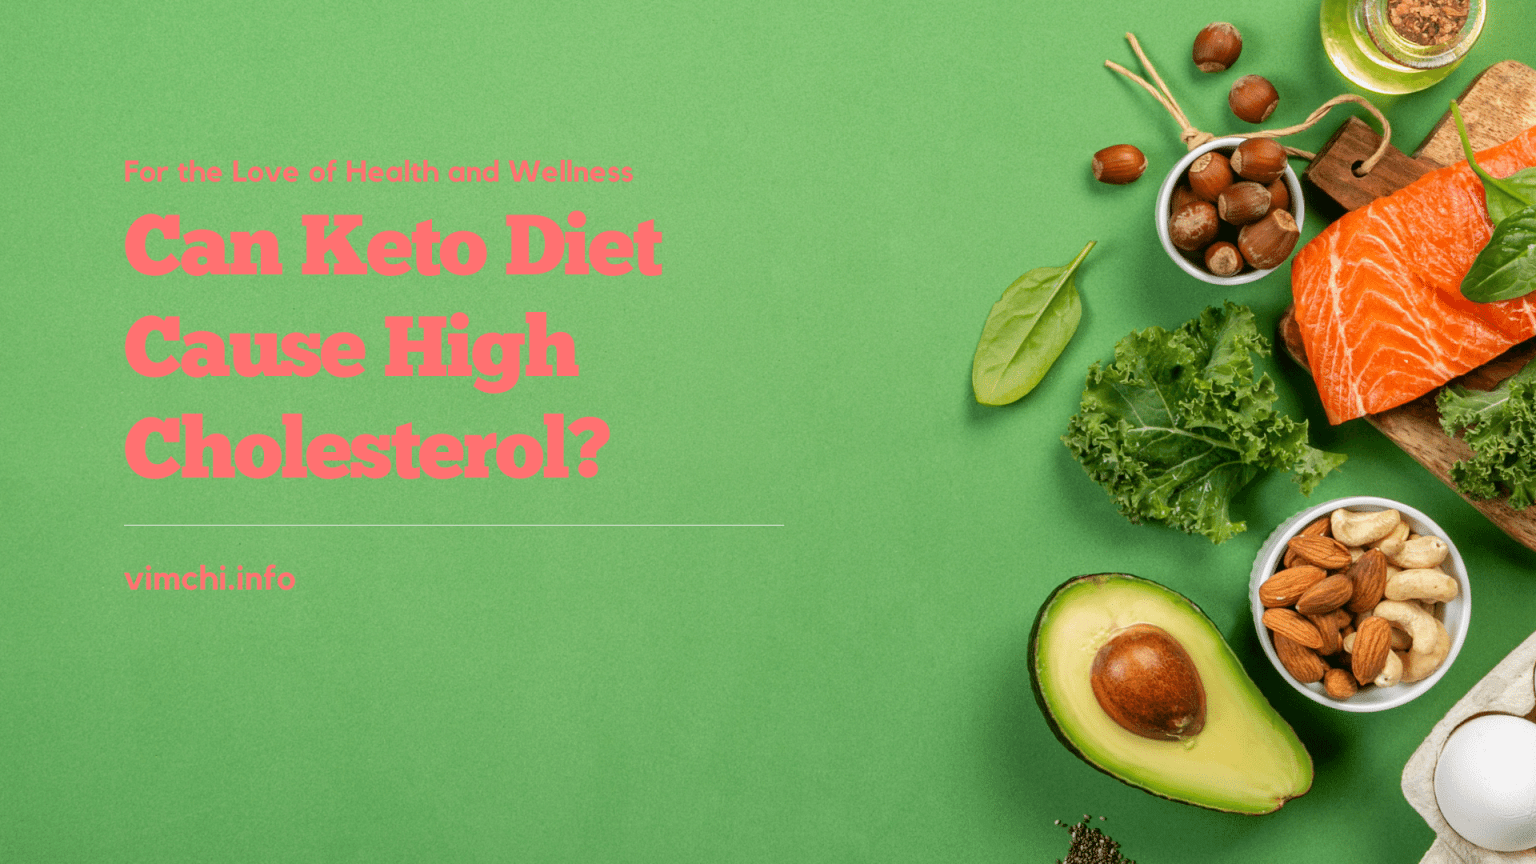 Can Keto Diet Cause High Cholesterol? Here